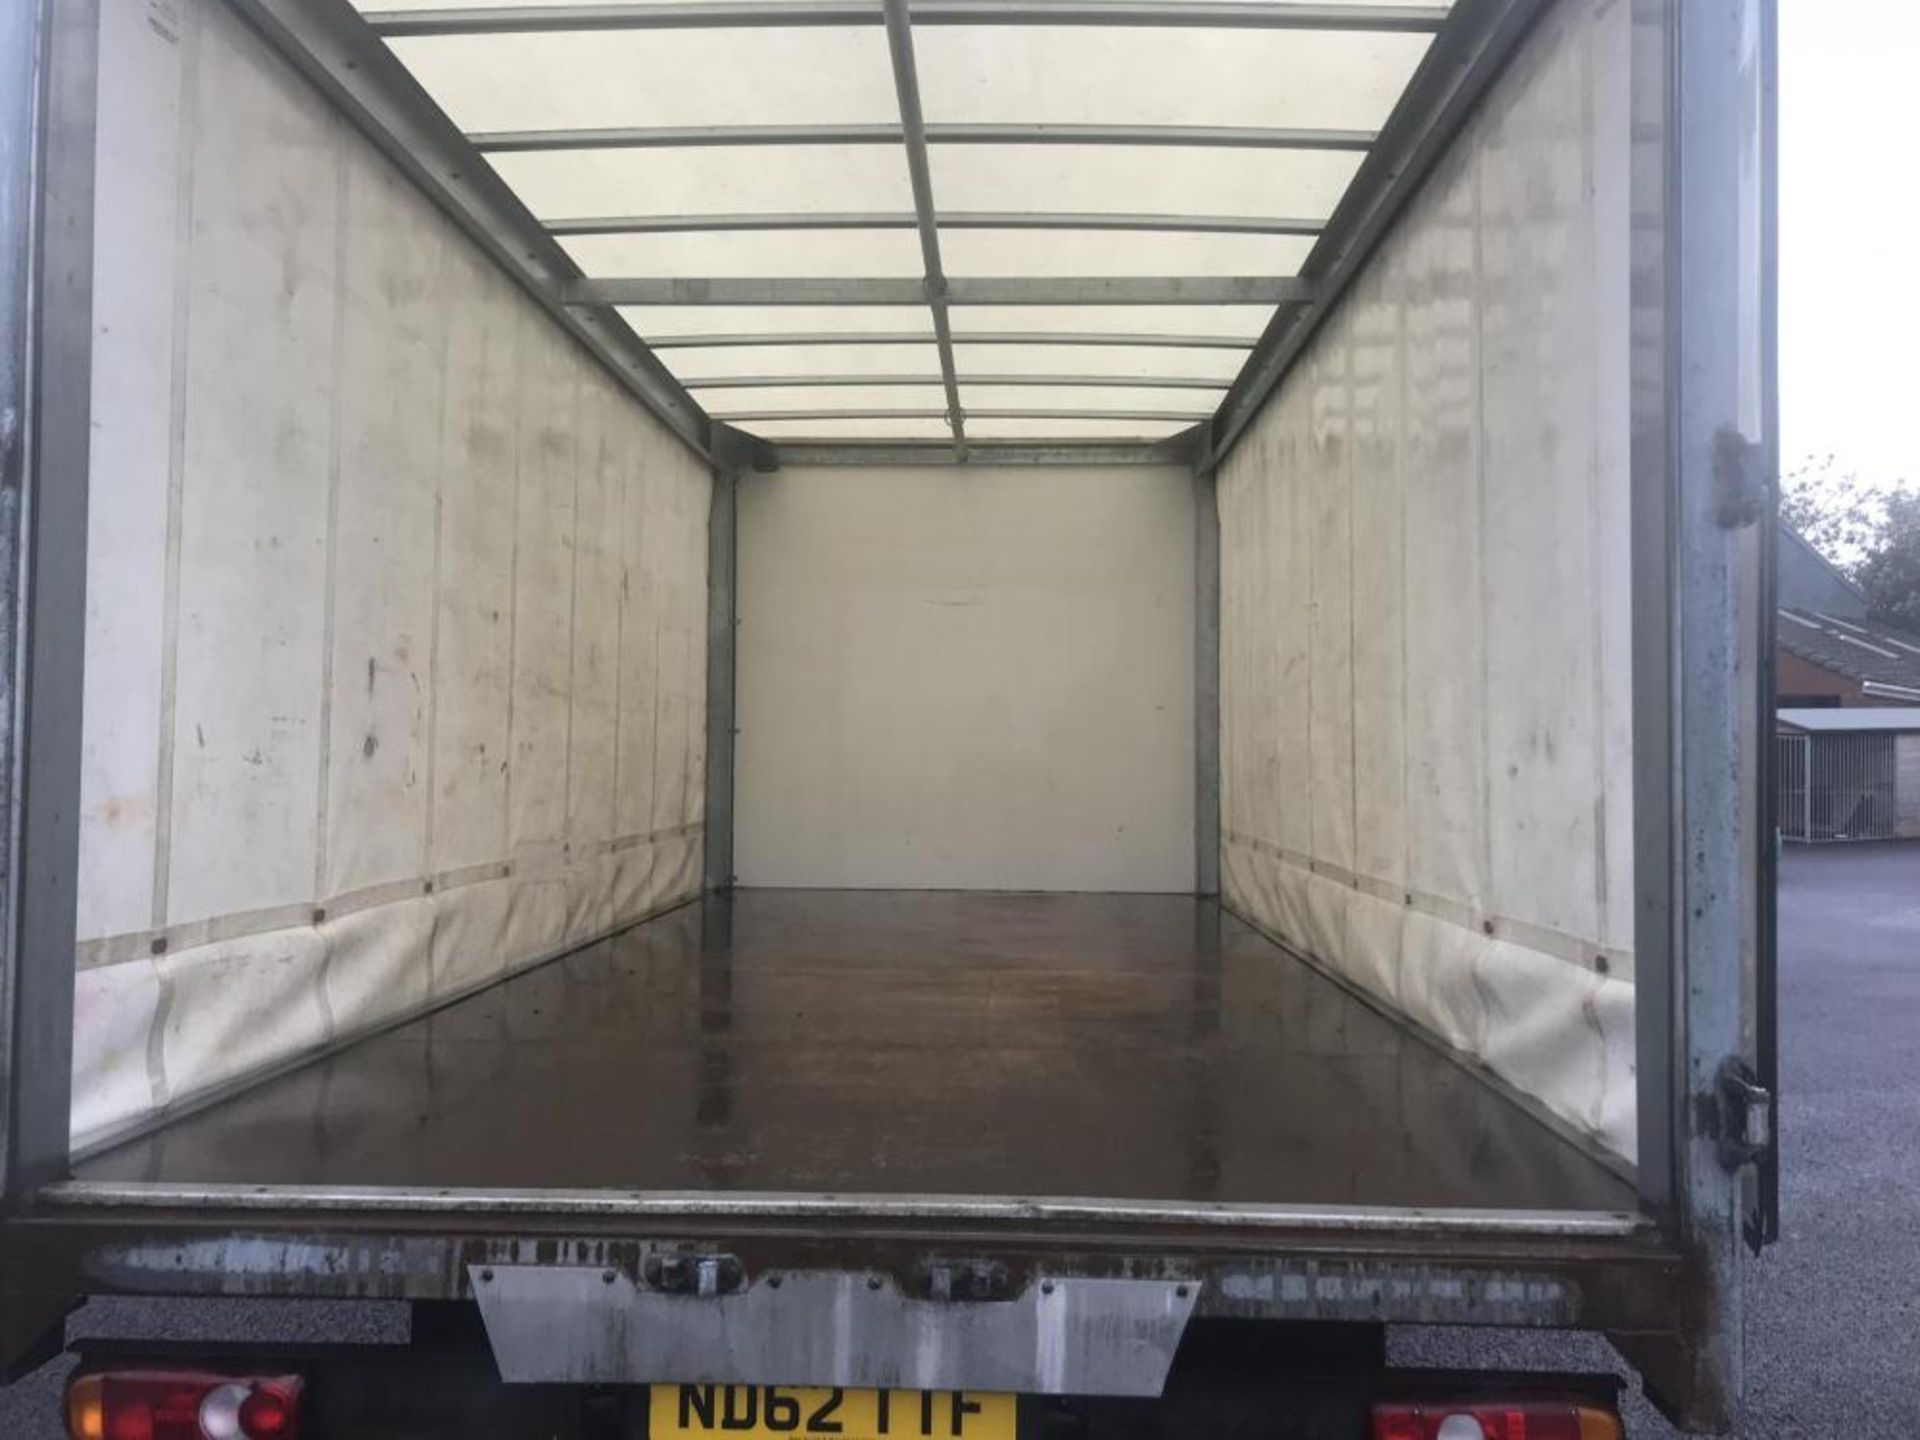 2013/62 REG MITSUBISHI FUSO CANTER 7C15 43 CURTAIN SIDE TRUCK 7.5 TON AUTO GEARBOX *PLUS VAT* - Image 5 of 14